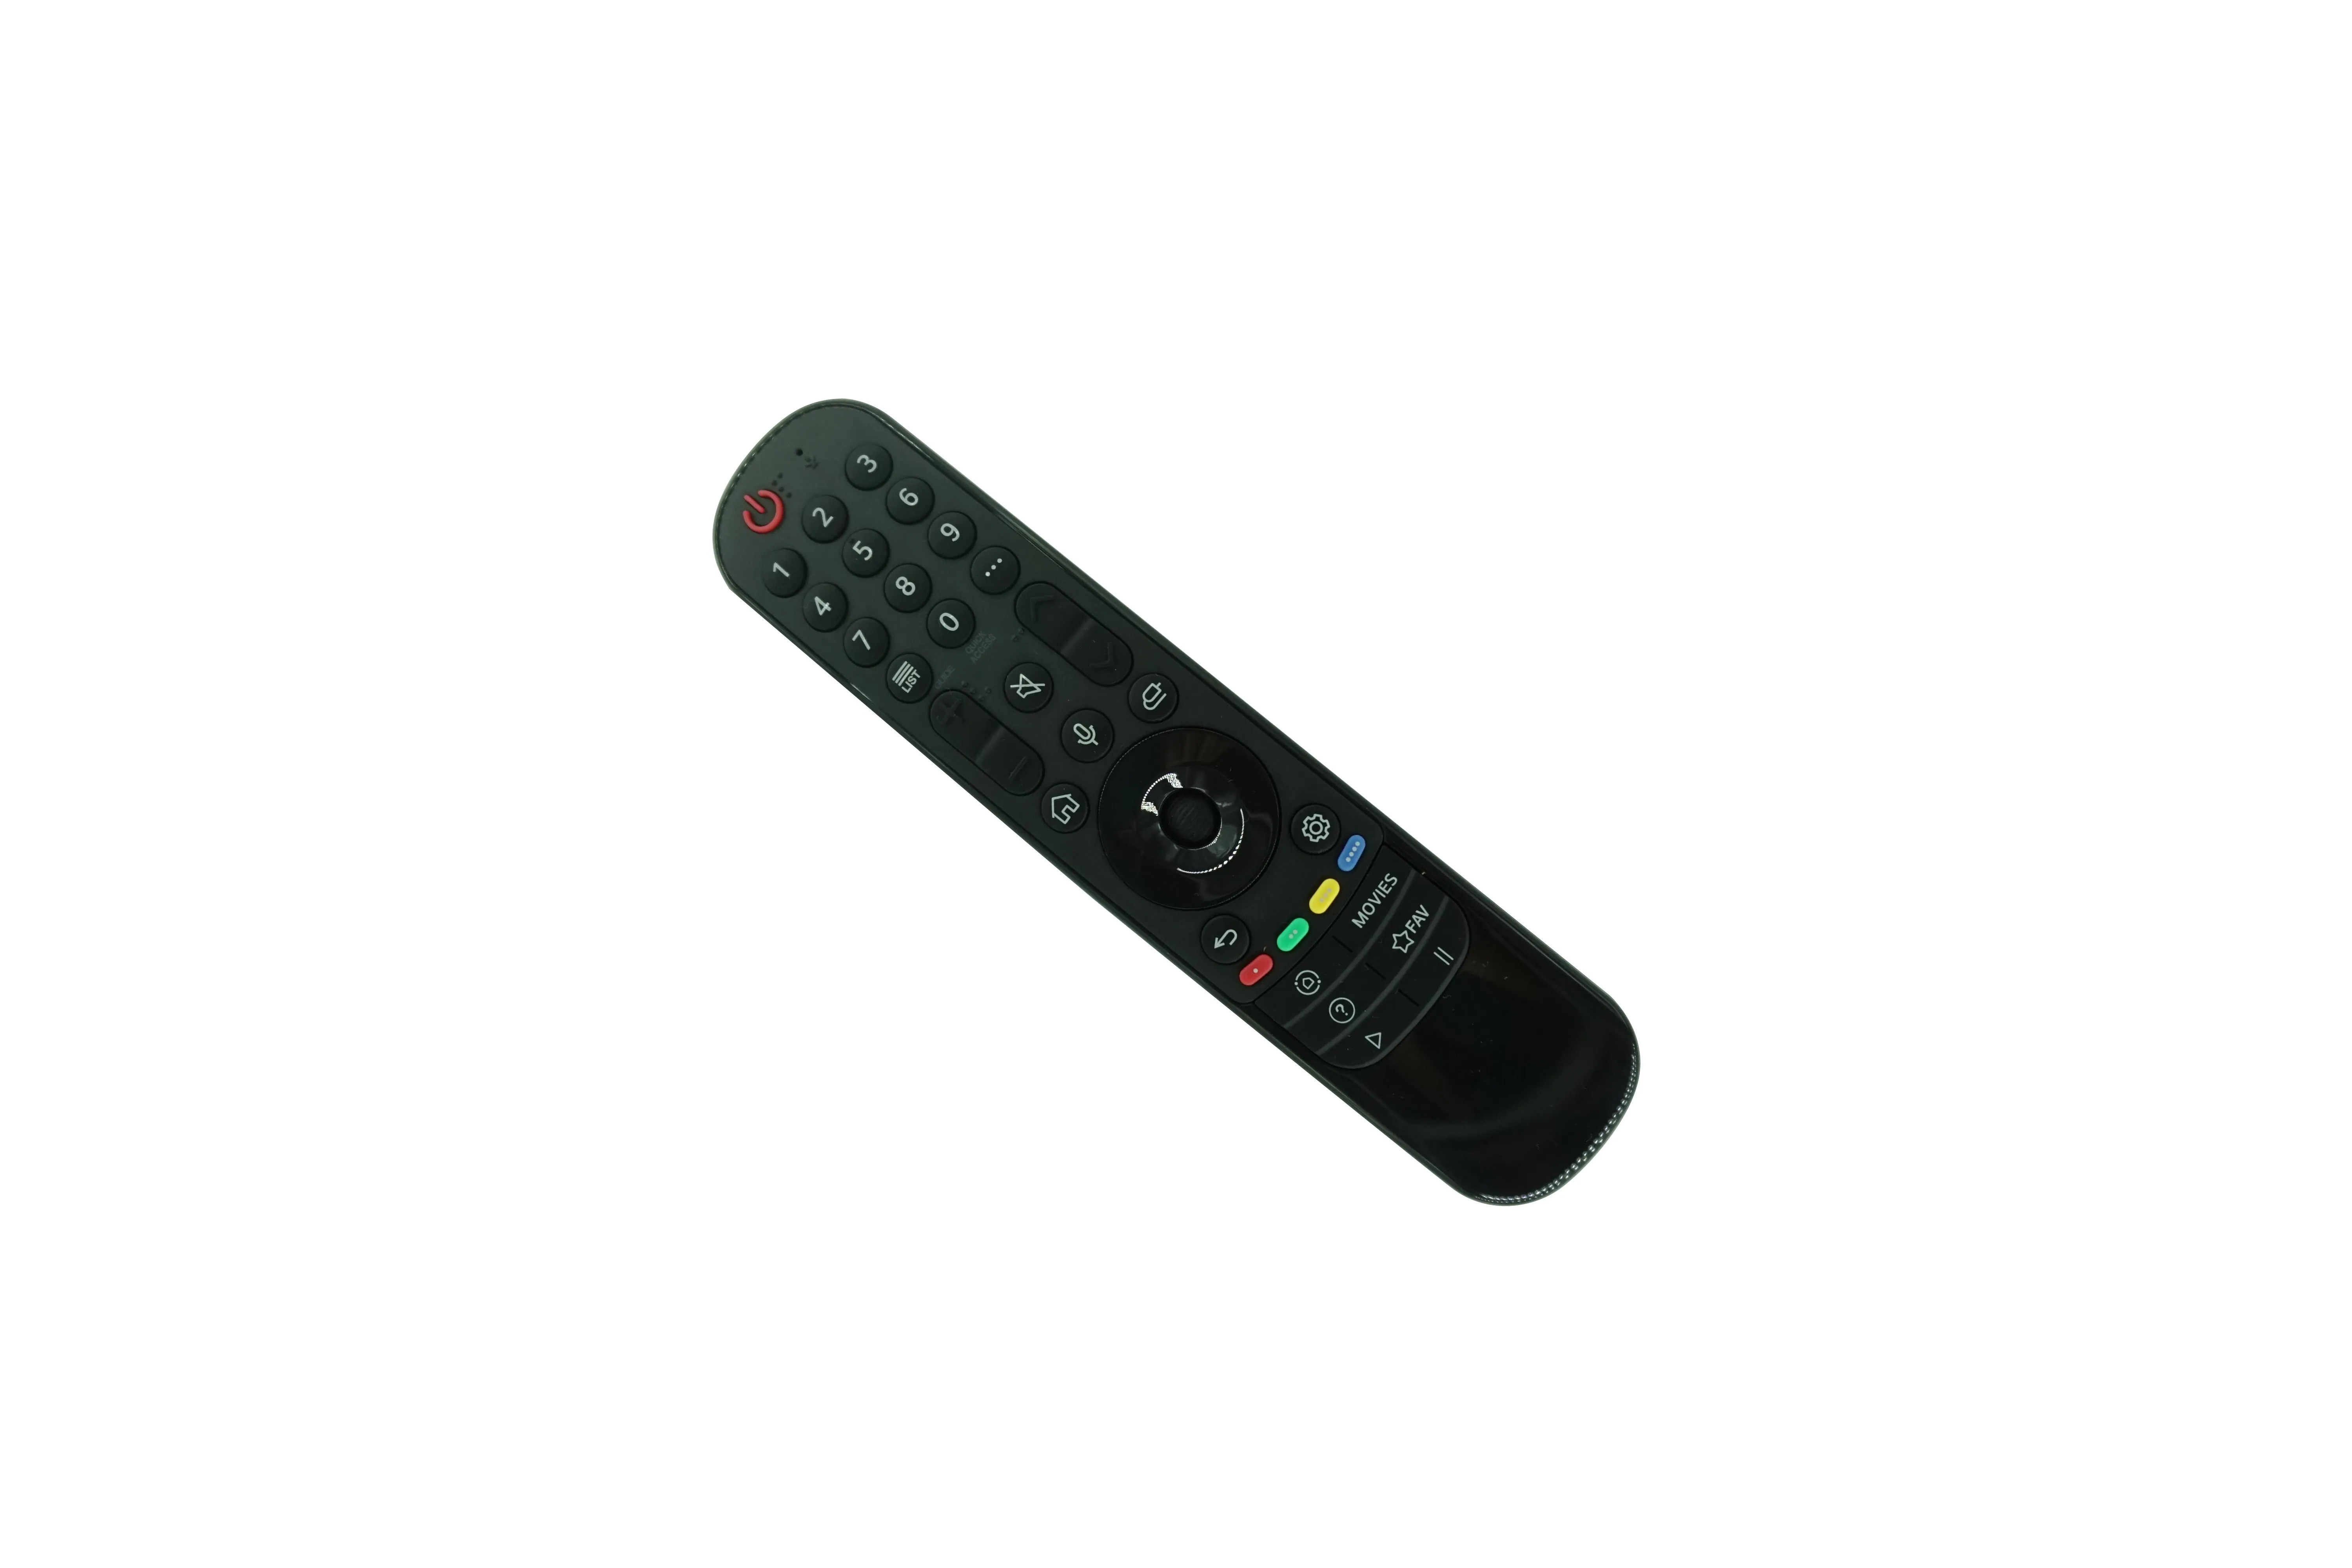 For Lg Remote Control Ultra Hd Uhd Smart Hdtv Tv 70Up8070Pua 75Nano75Upa 75Nano80Upa 75Nano85Apa 75Nano90Upa 75Qned90Upa 75Qned99Upa 75Up7070Pud 4K Not Voice